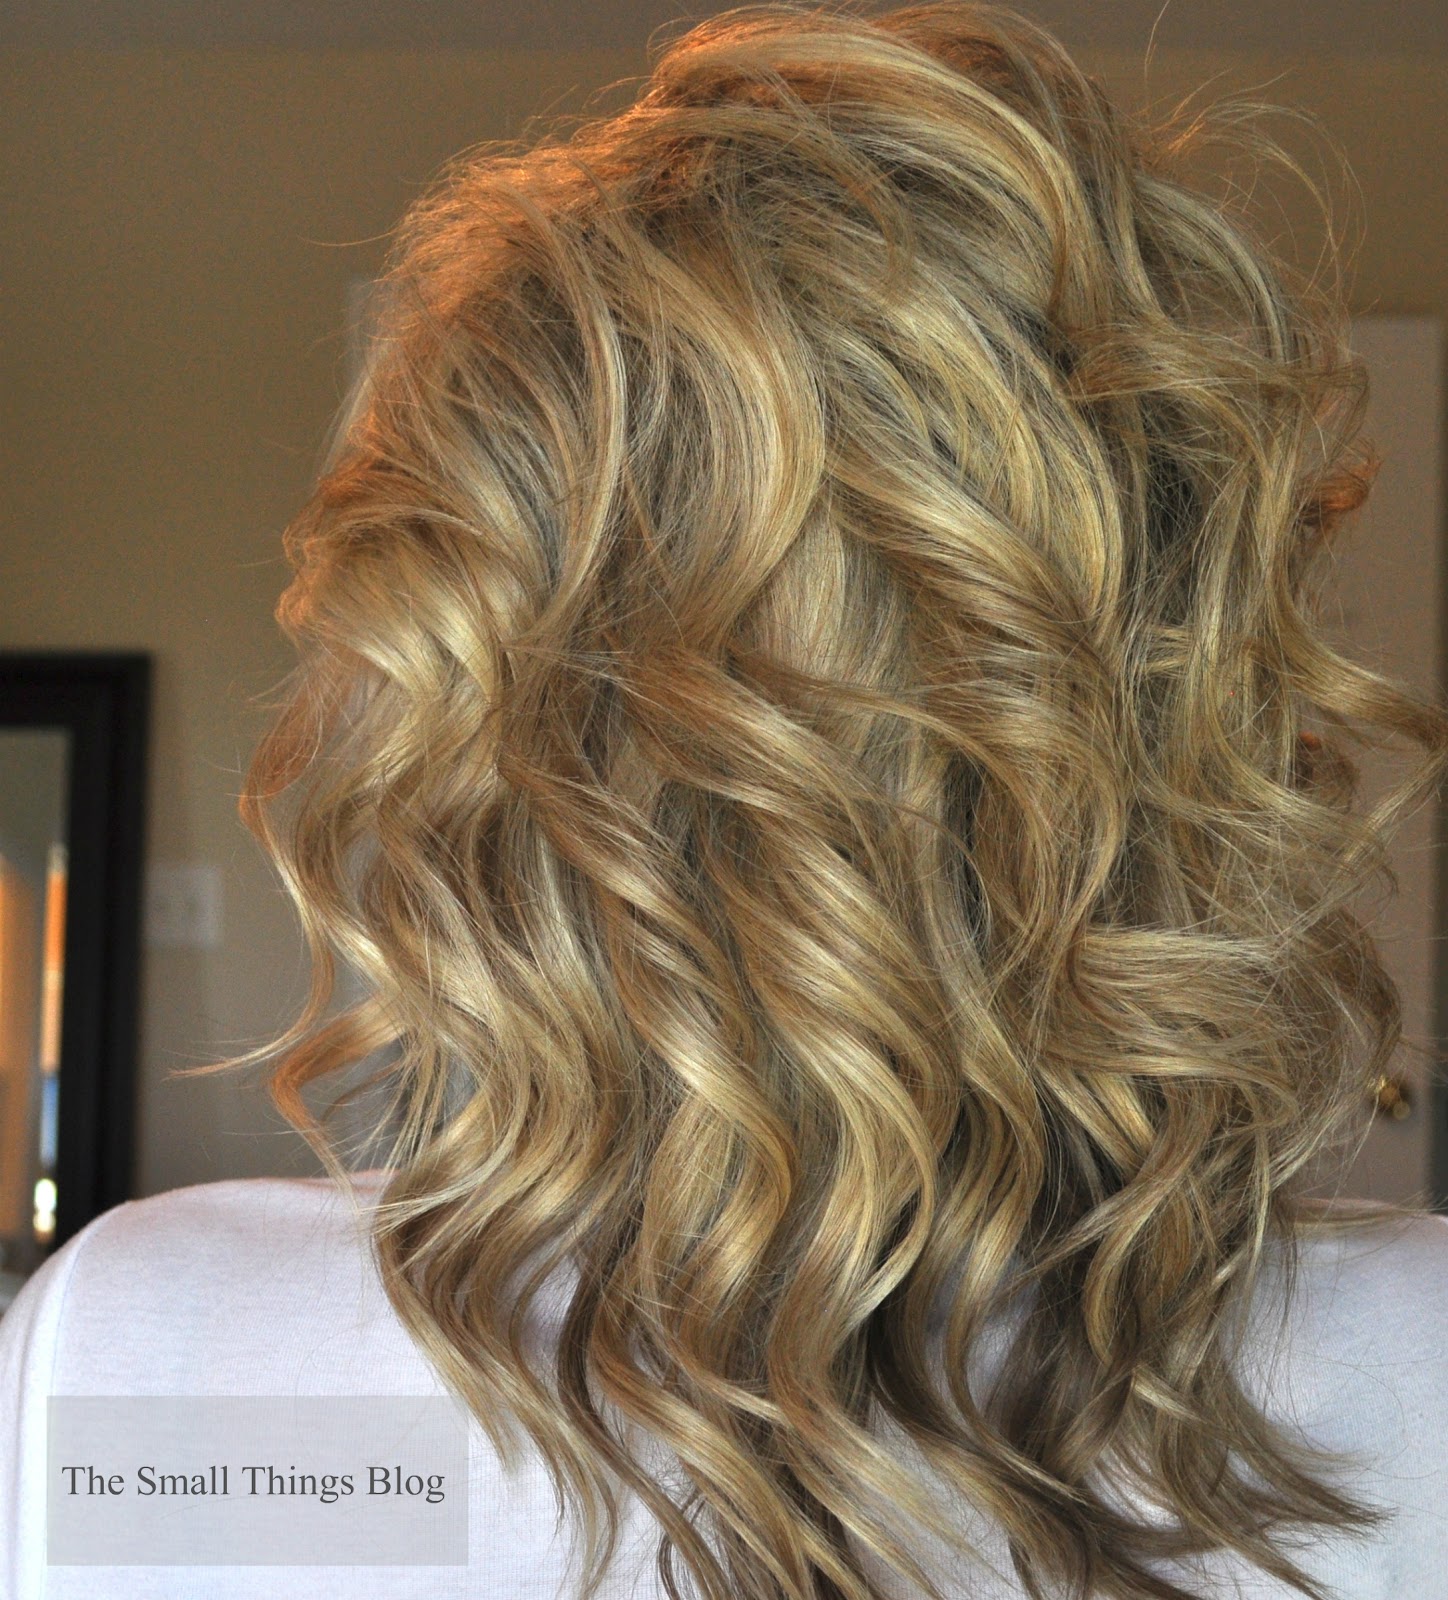 How to use a curling wand - The Small Things Blog